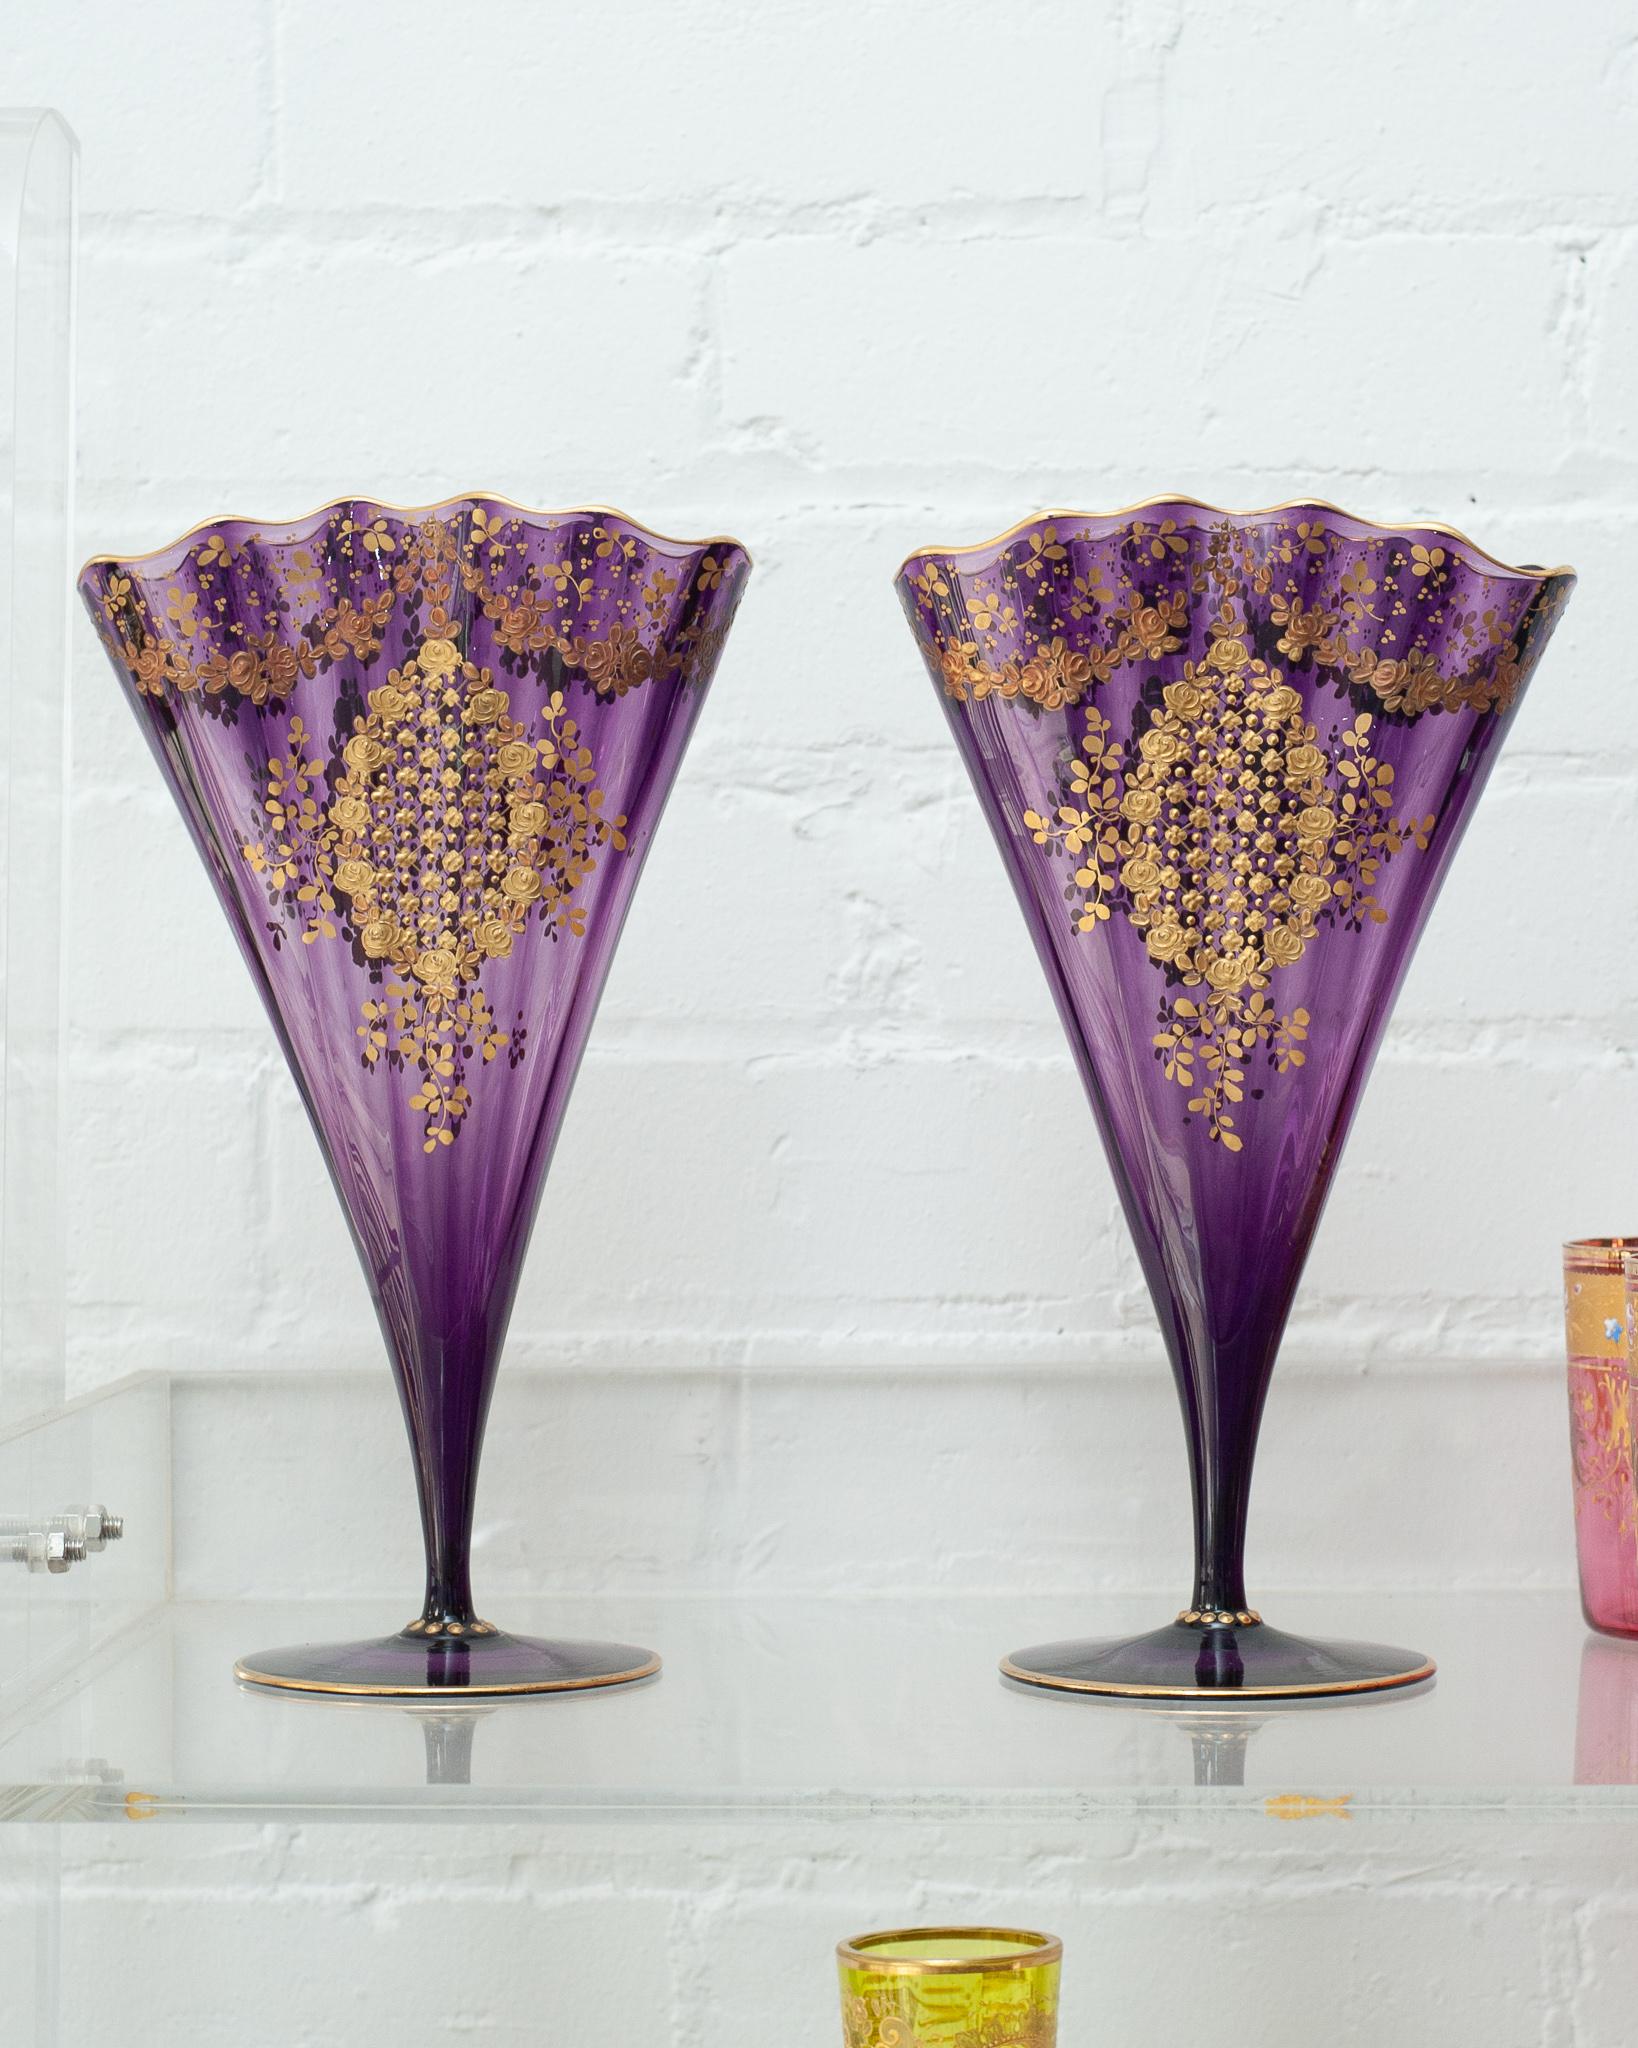 A spectacular pair of antique Moser purple amethyst fan vases with ornate gold gilding. Produced in the early 20th century, these vases are in perfect condition and showcase a fine craftsmanship. Their vibrant amethyst purple tone highlights the